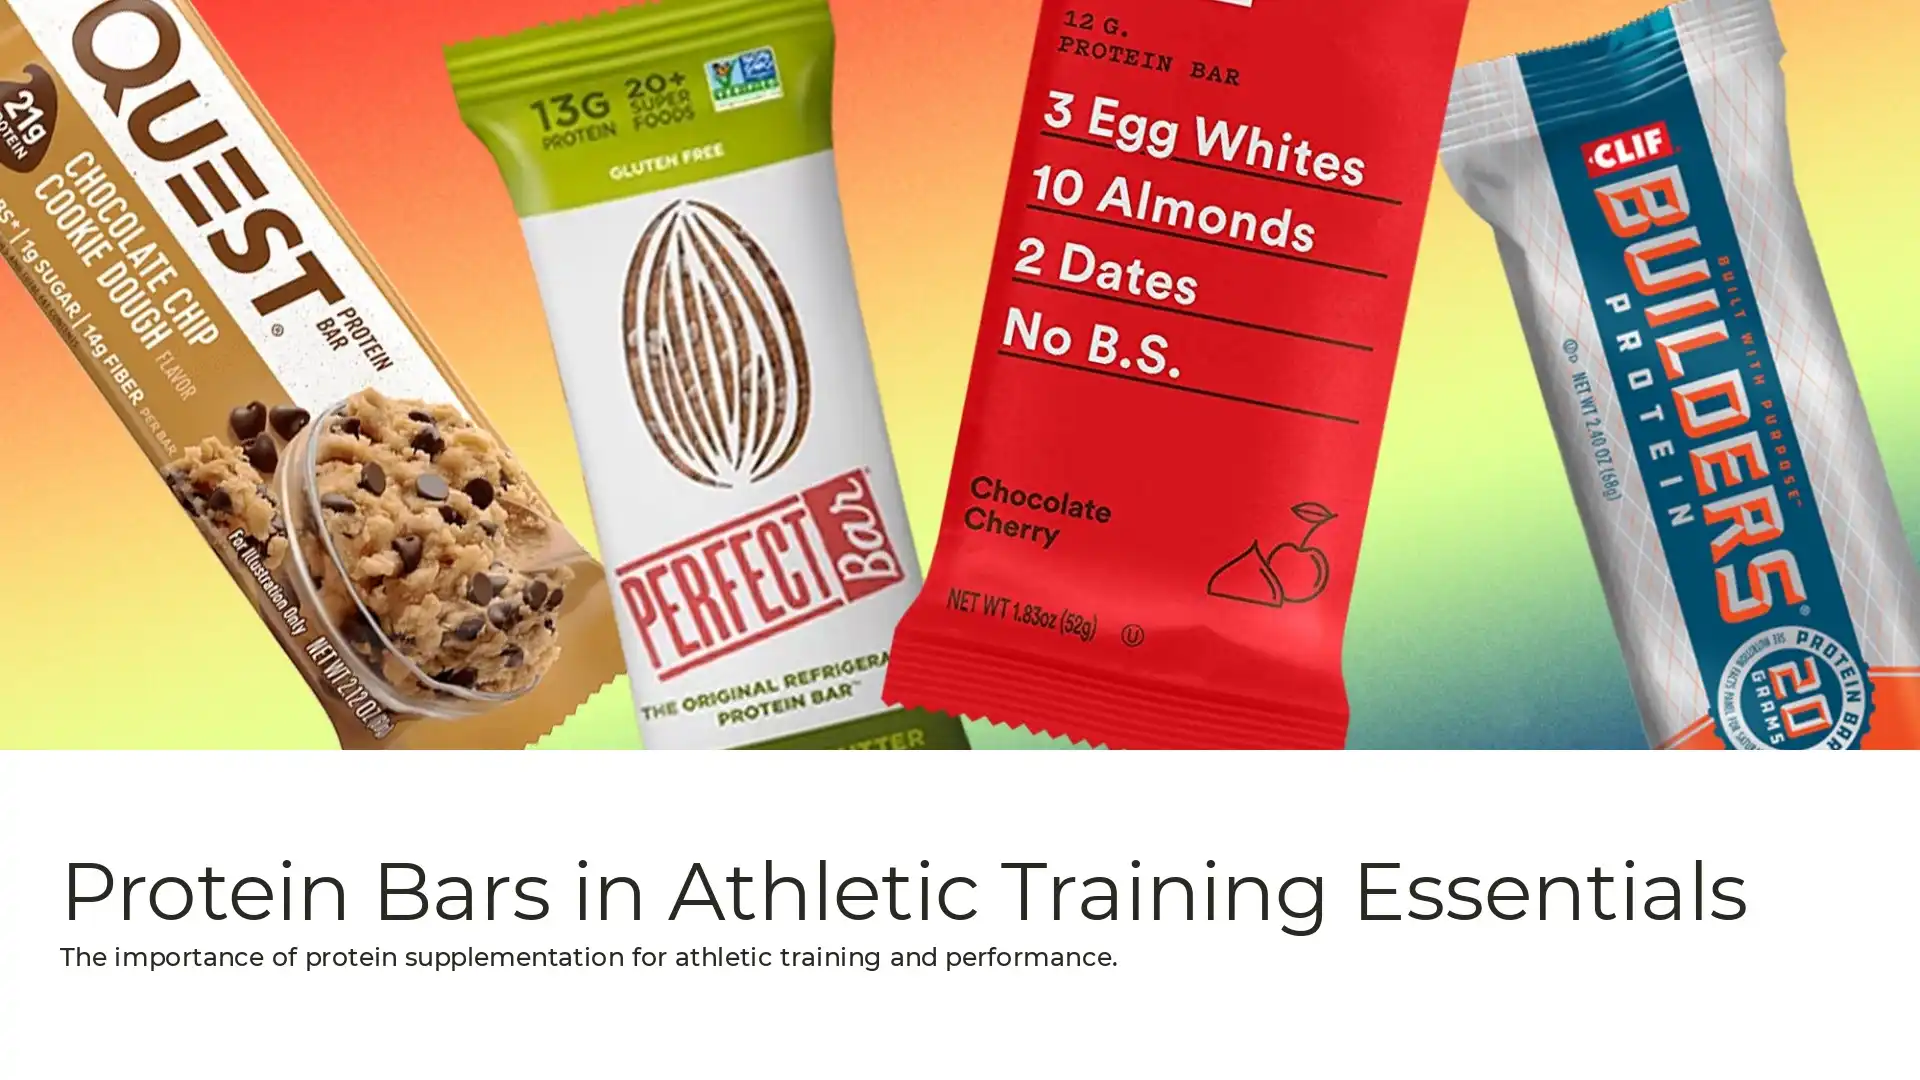 Protein Bars in Athletic Training